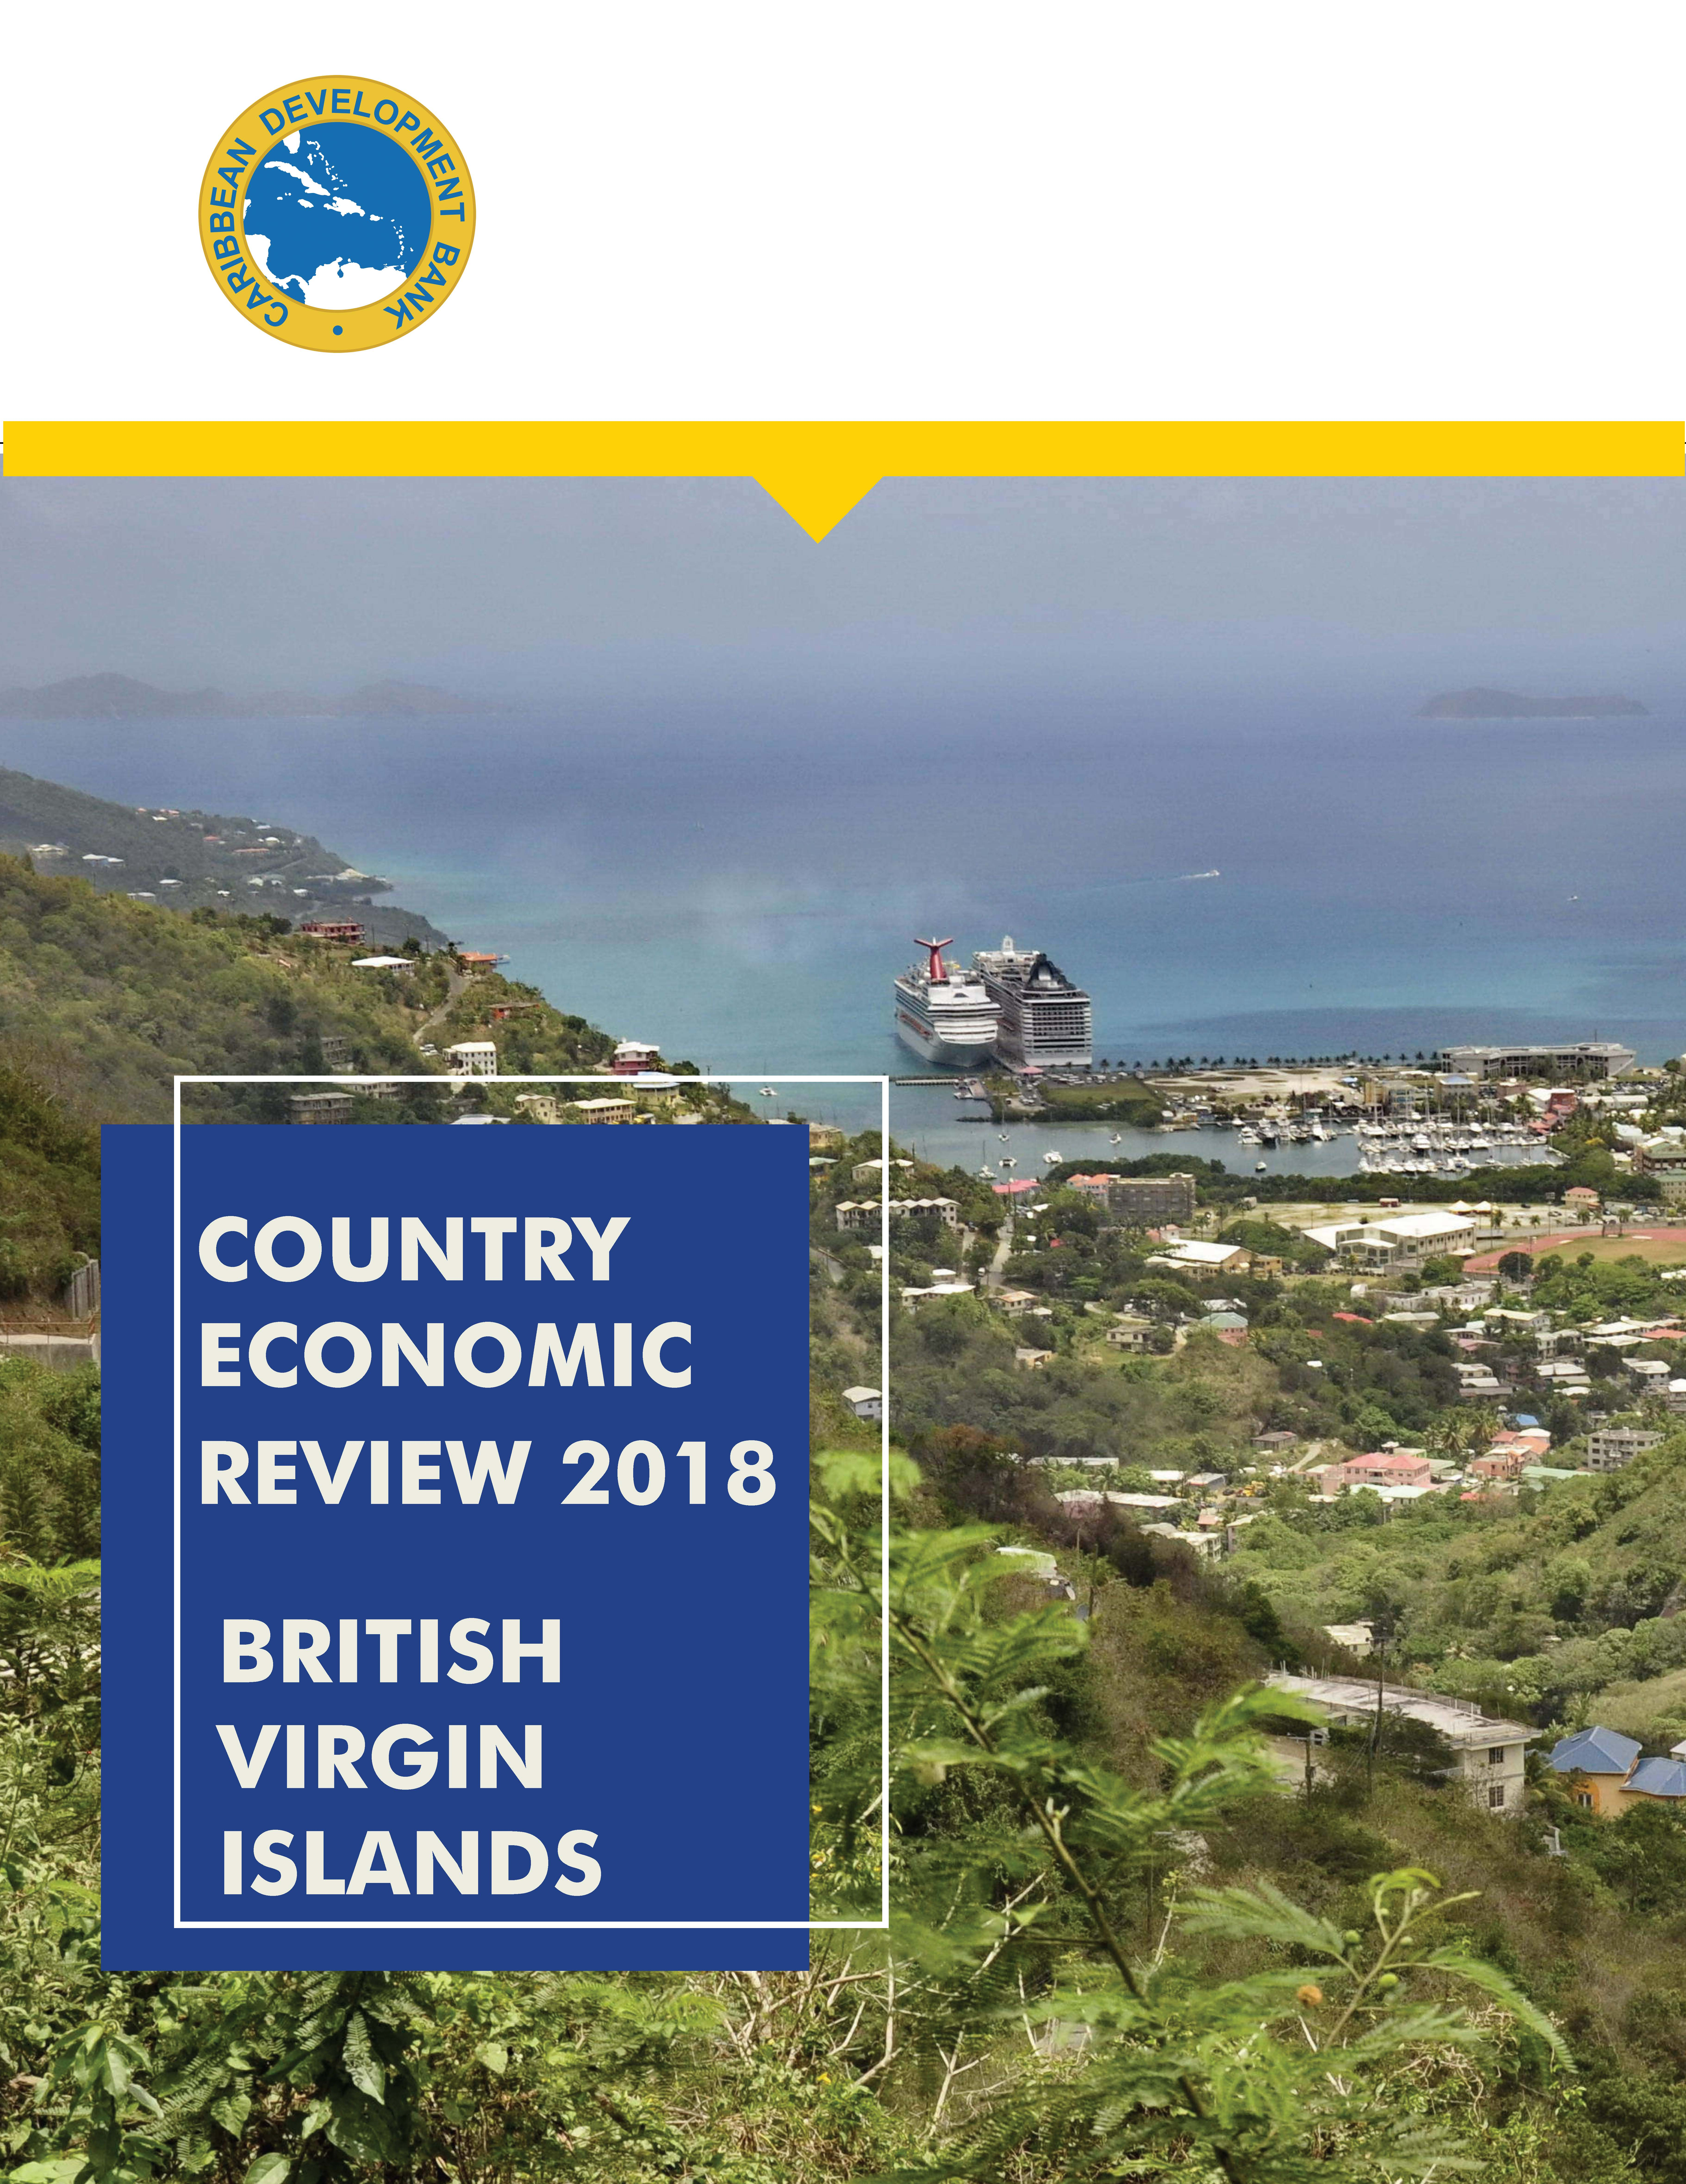 cover of 2018 Economic Review for BVI showing a view of Tortola, British Virgin Islands